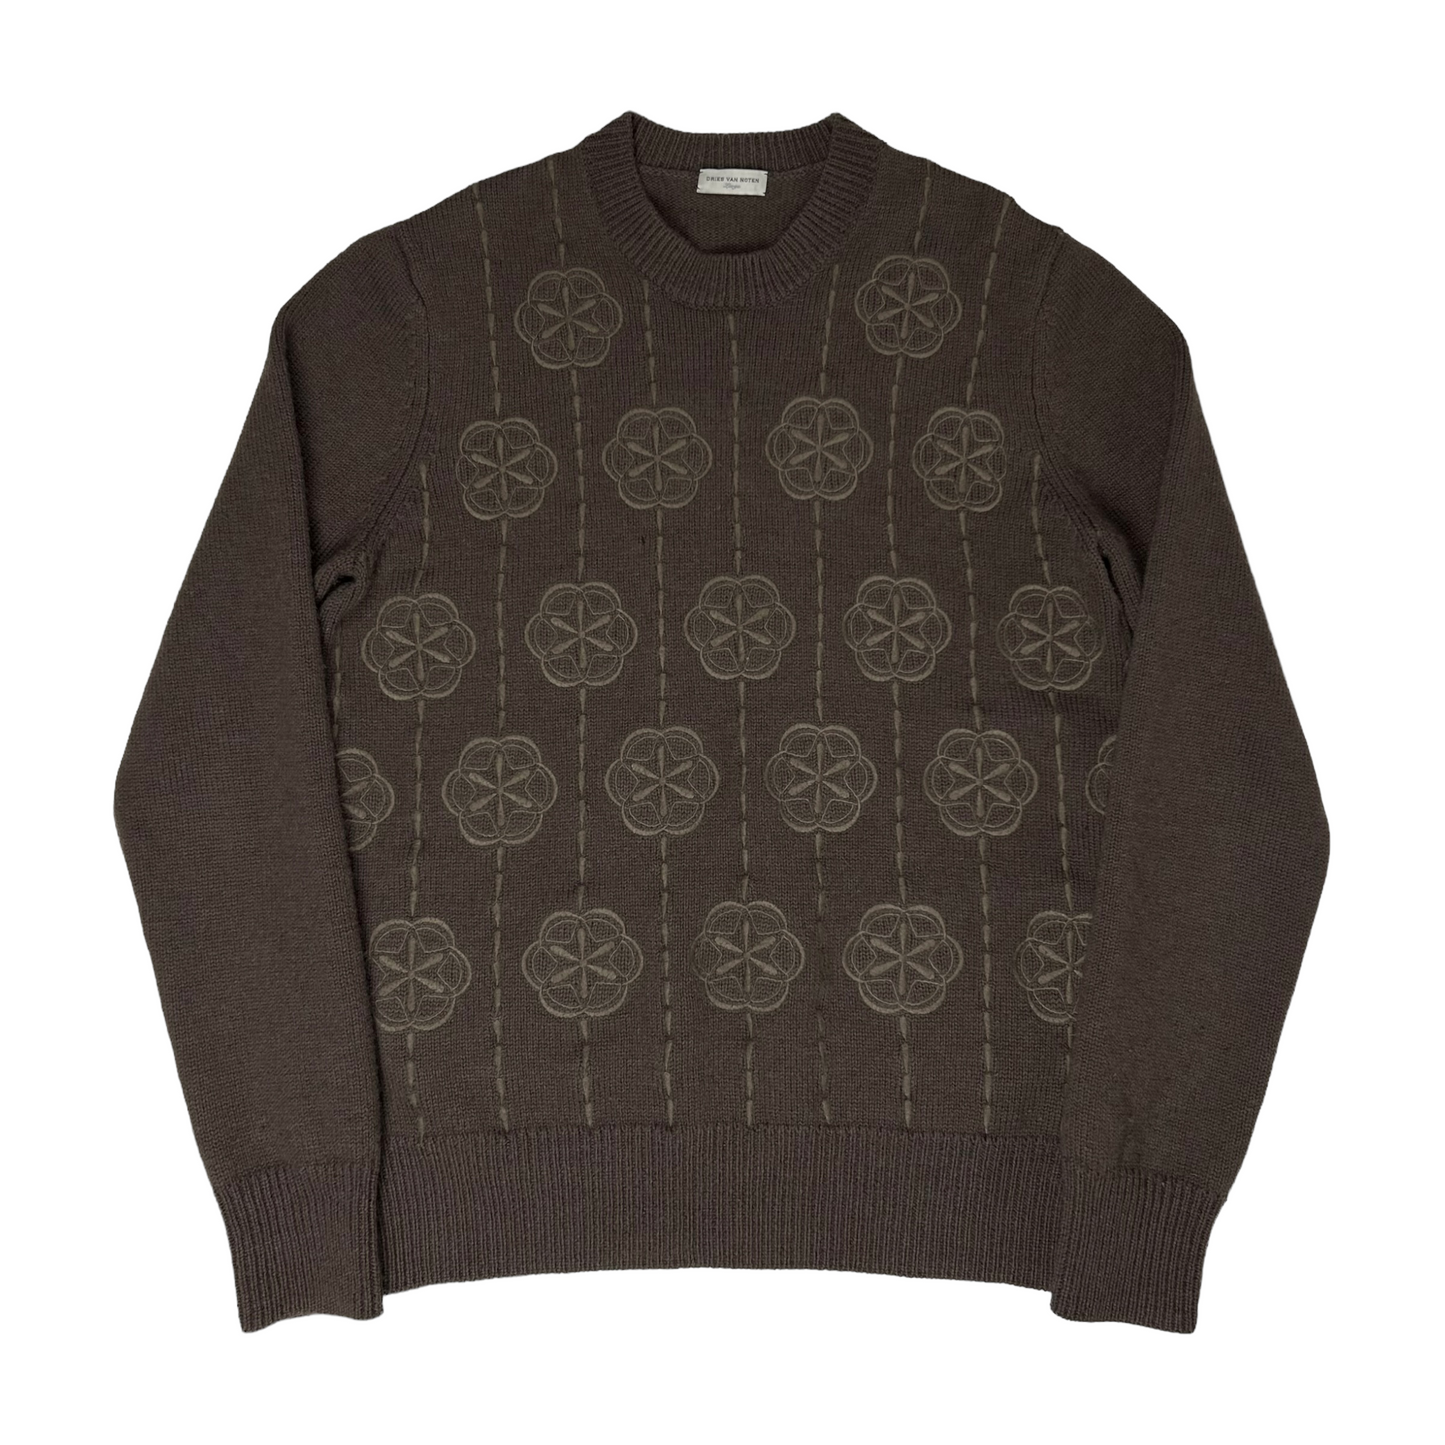 Dries Van Noten Floral Embroidered Wool Sweater - AW18